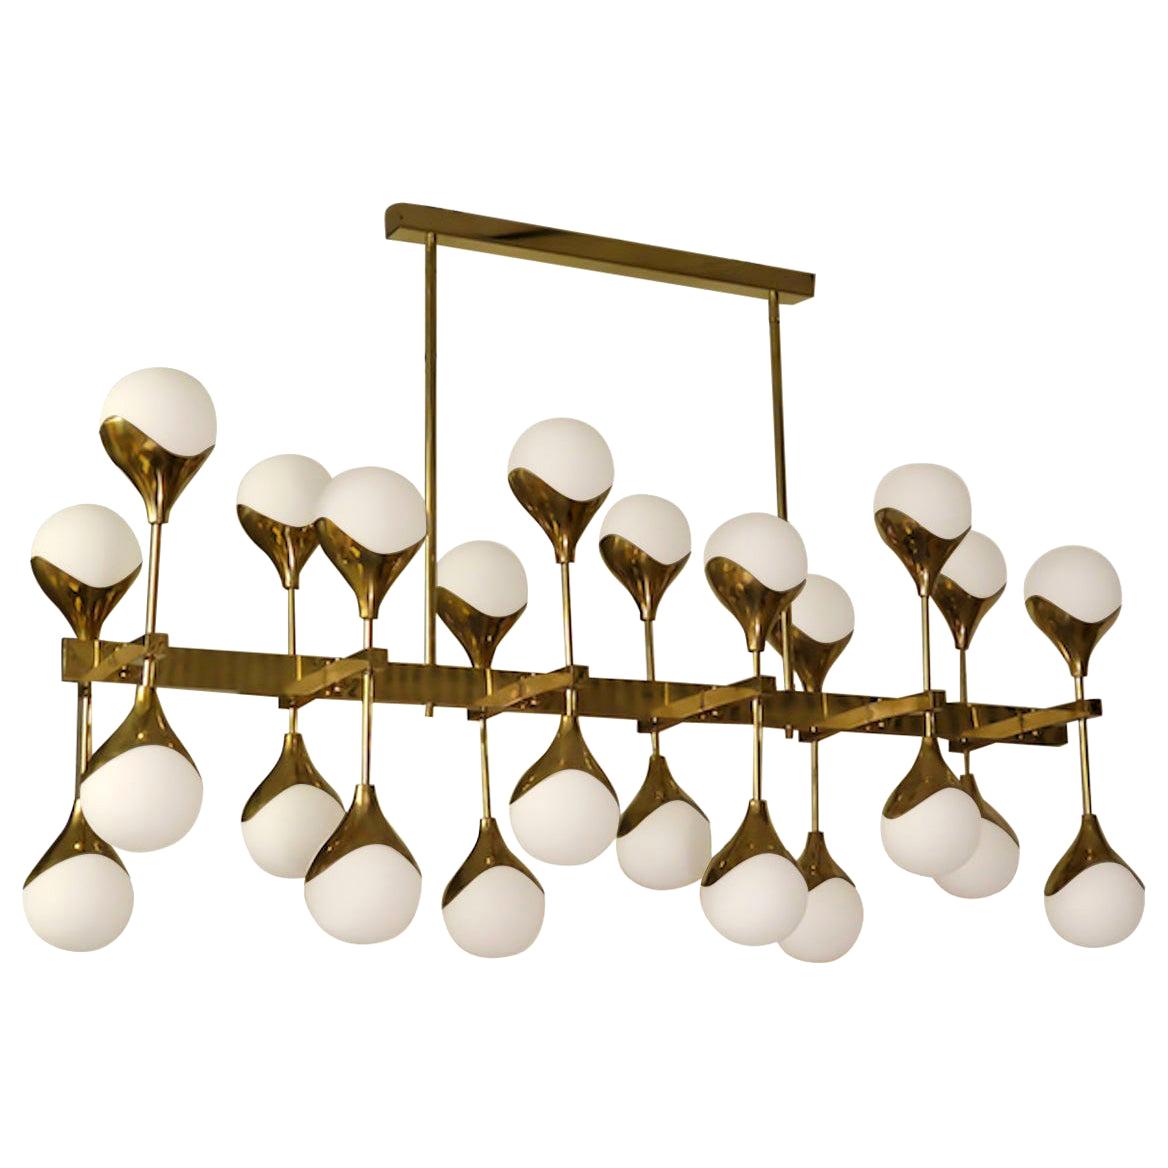 Max Ingrand Brass and Glass Chandelier and Pendant, 2000 For Sale